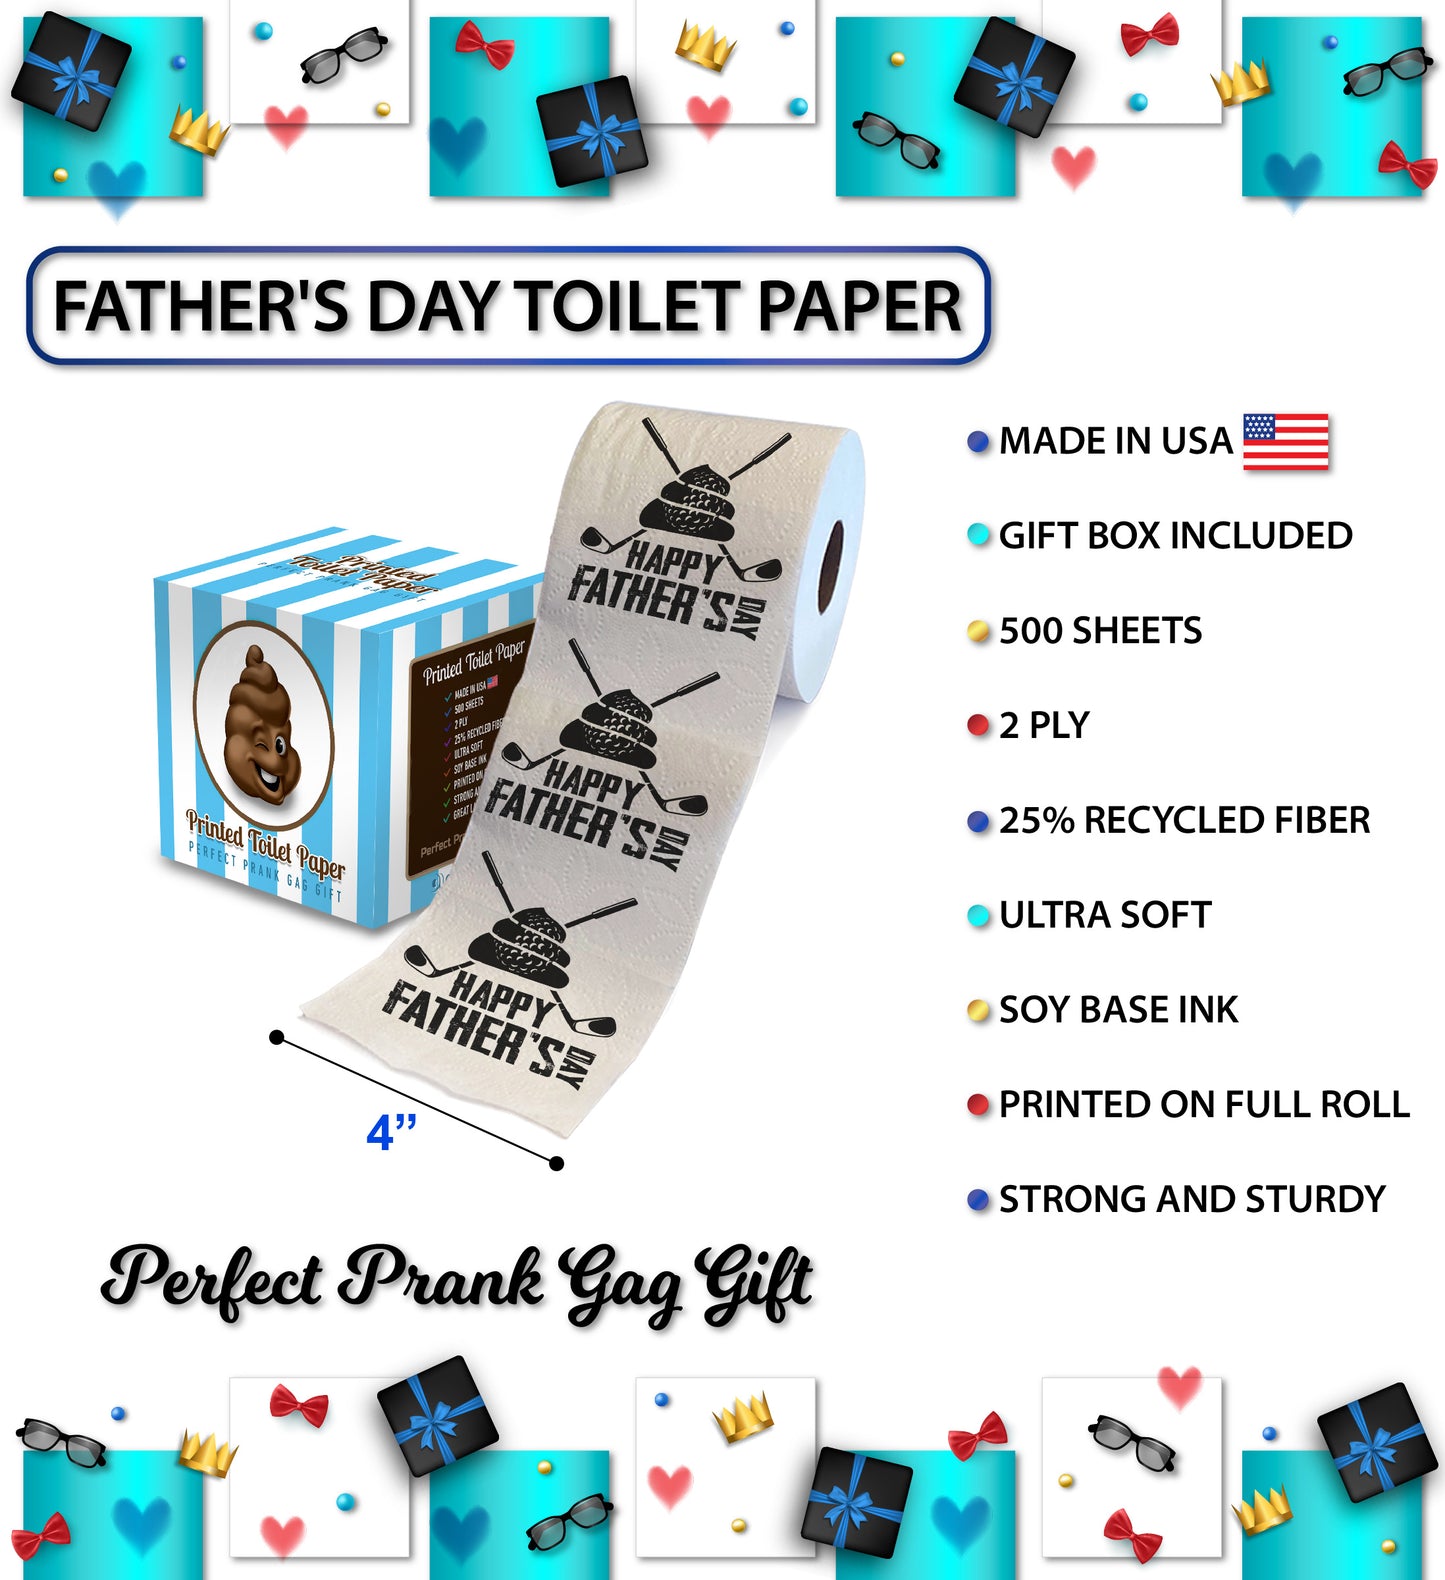 Printed TP Happy Fathers Day Golf With My Poop Printed Toilet Paper, 500 Sheets